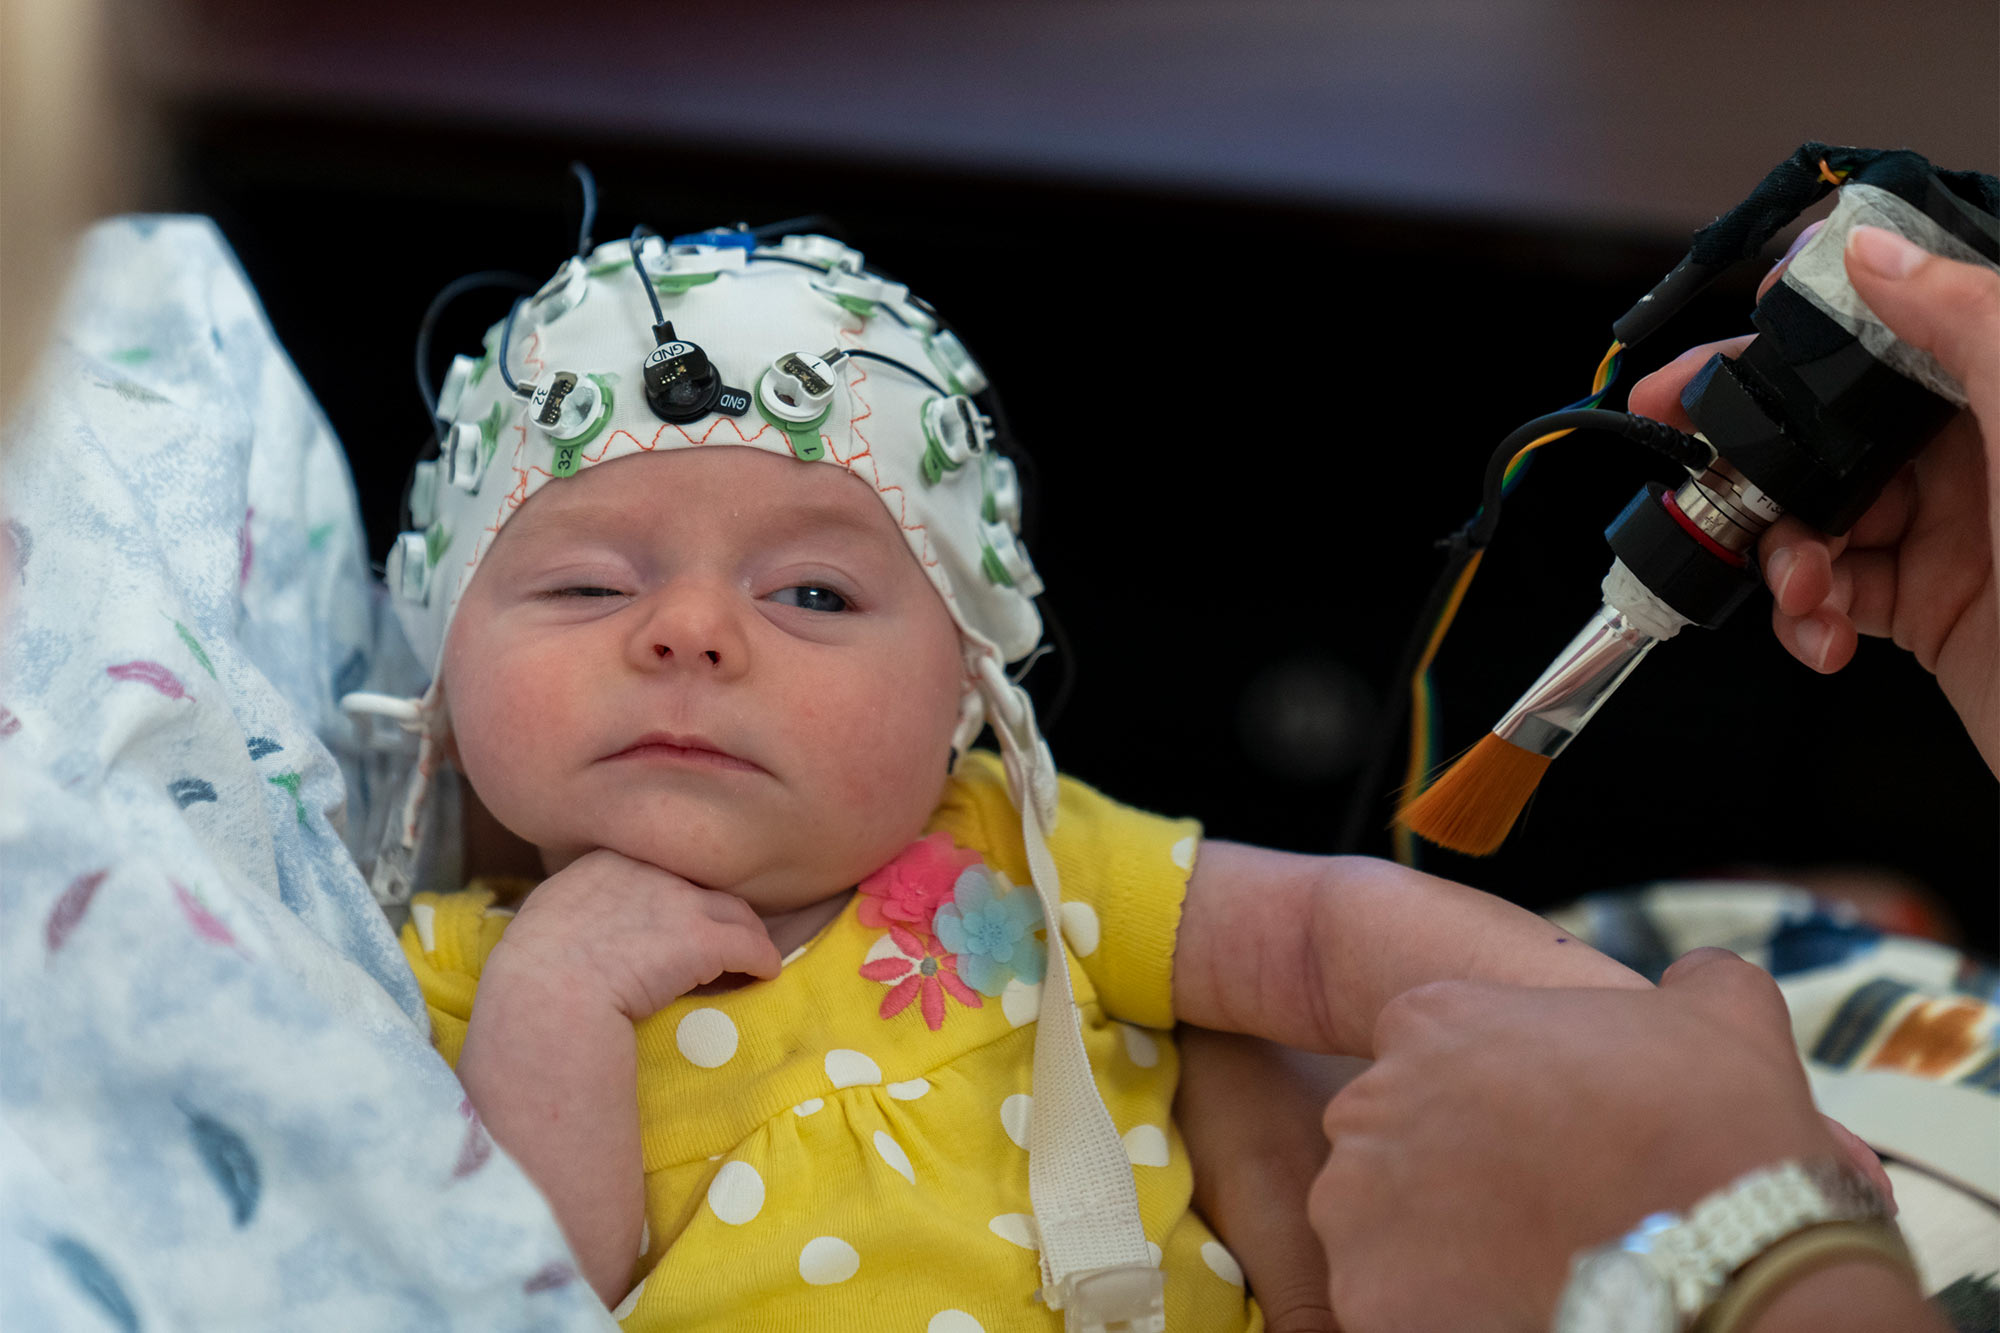 A baby wearing a skullcap rests her chin on her hand, while looking with one eye open at a researcher holding a paintbrush near her arm